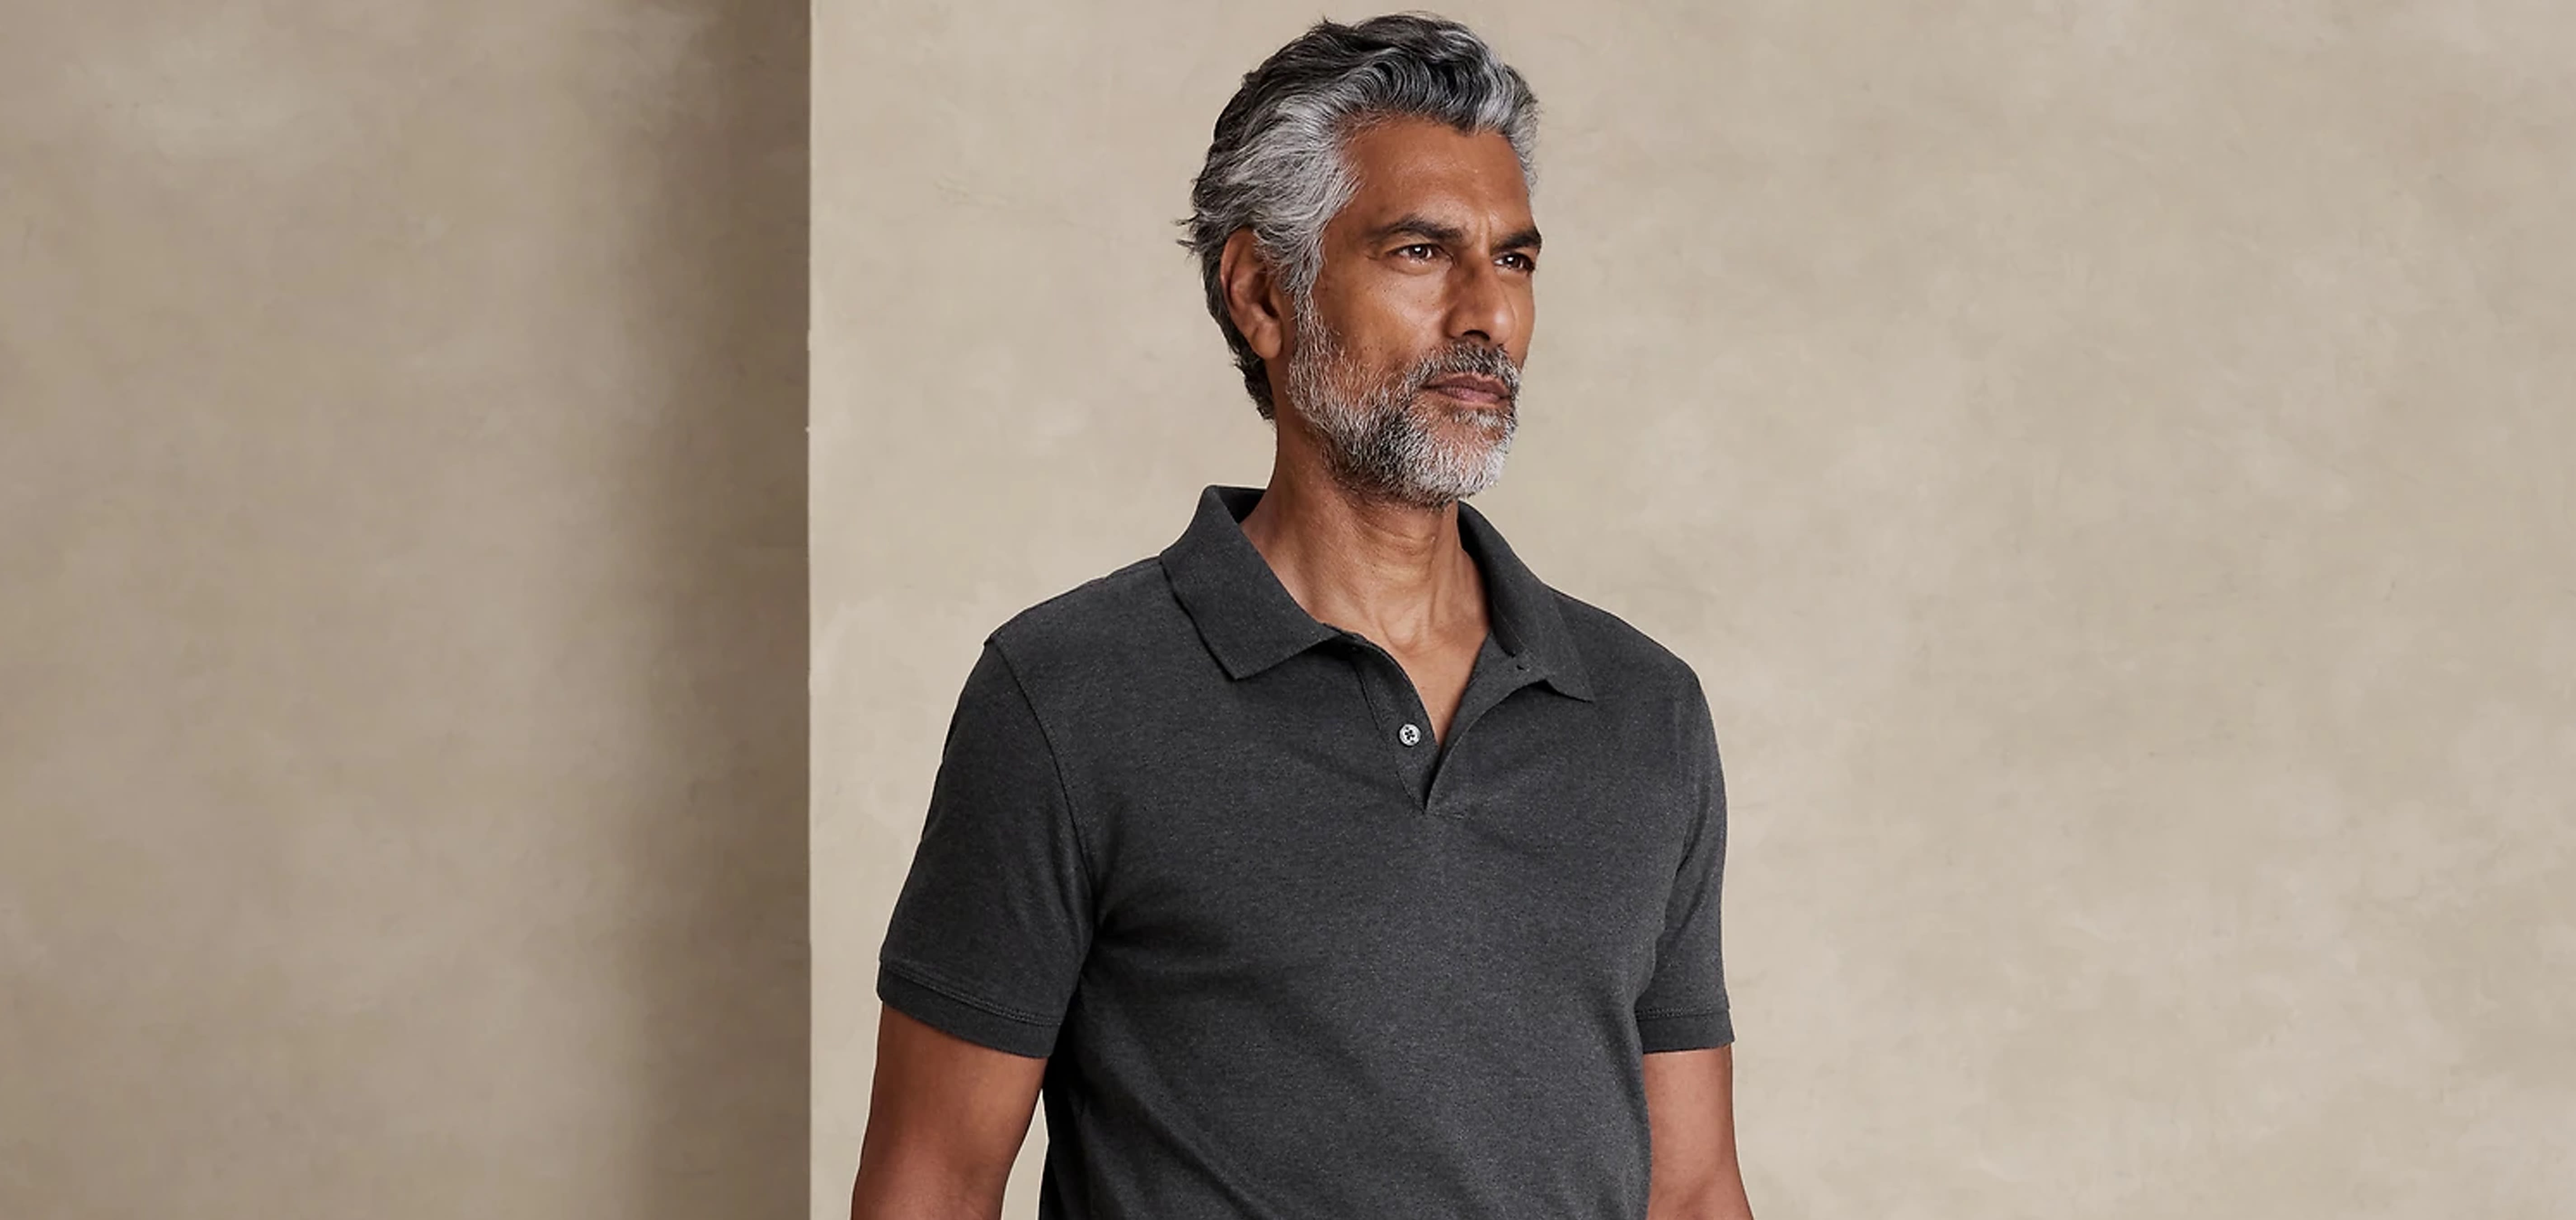 19 best polo shirts for men to buy in 2024